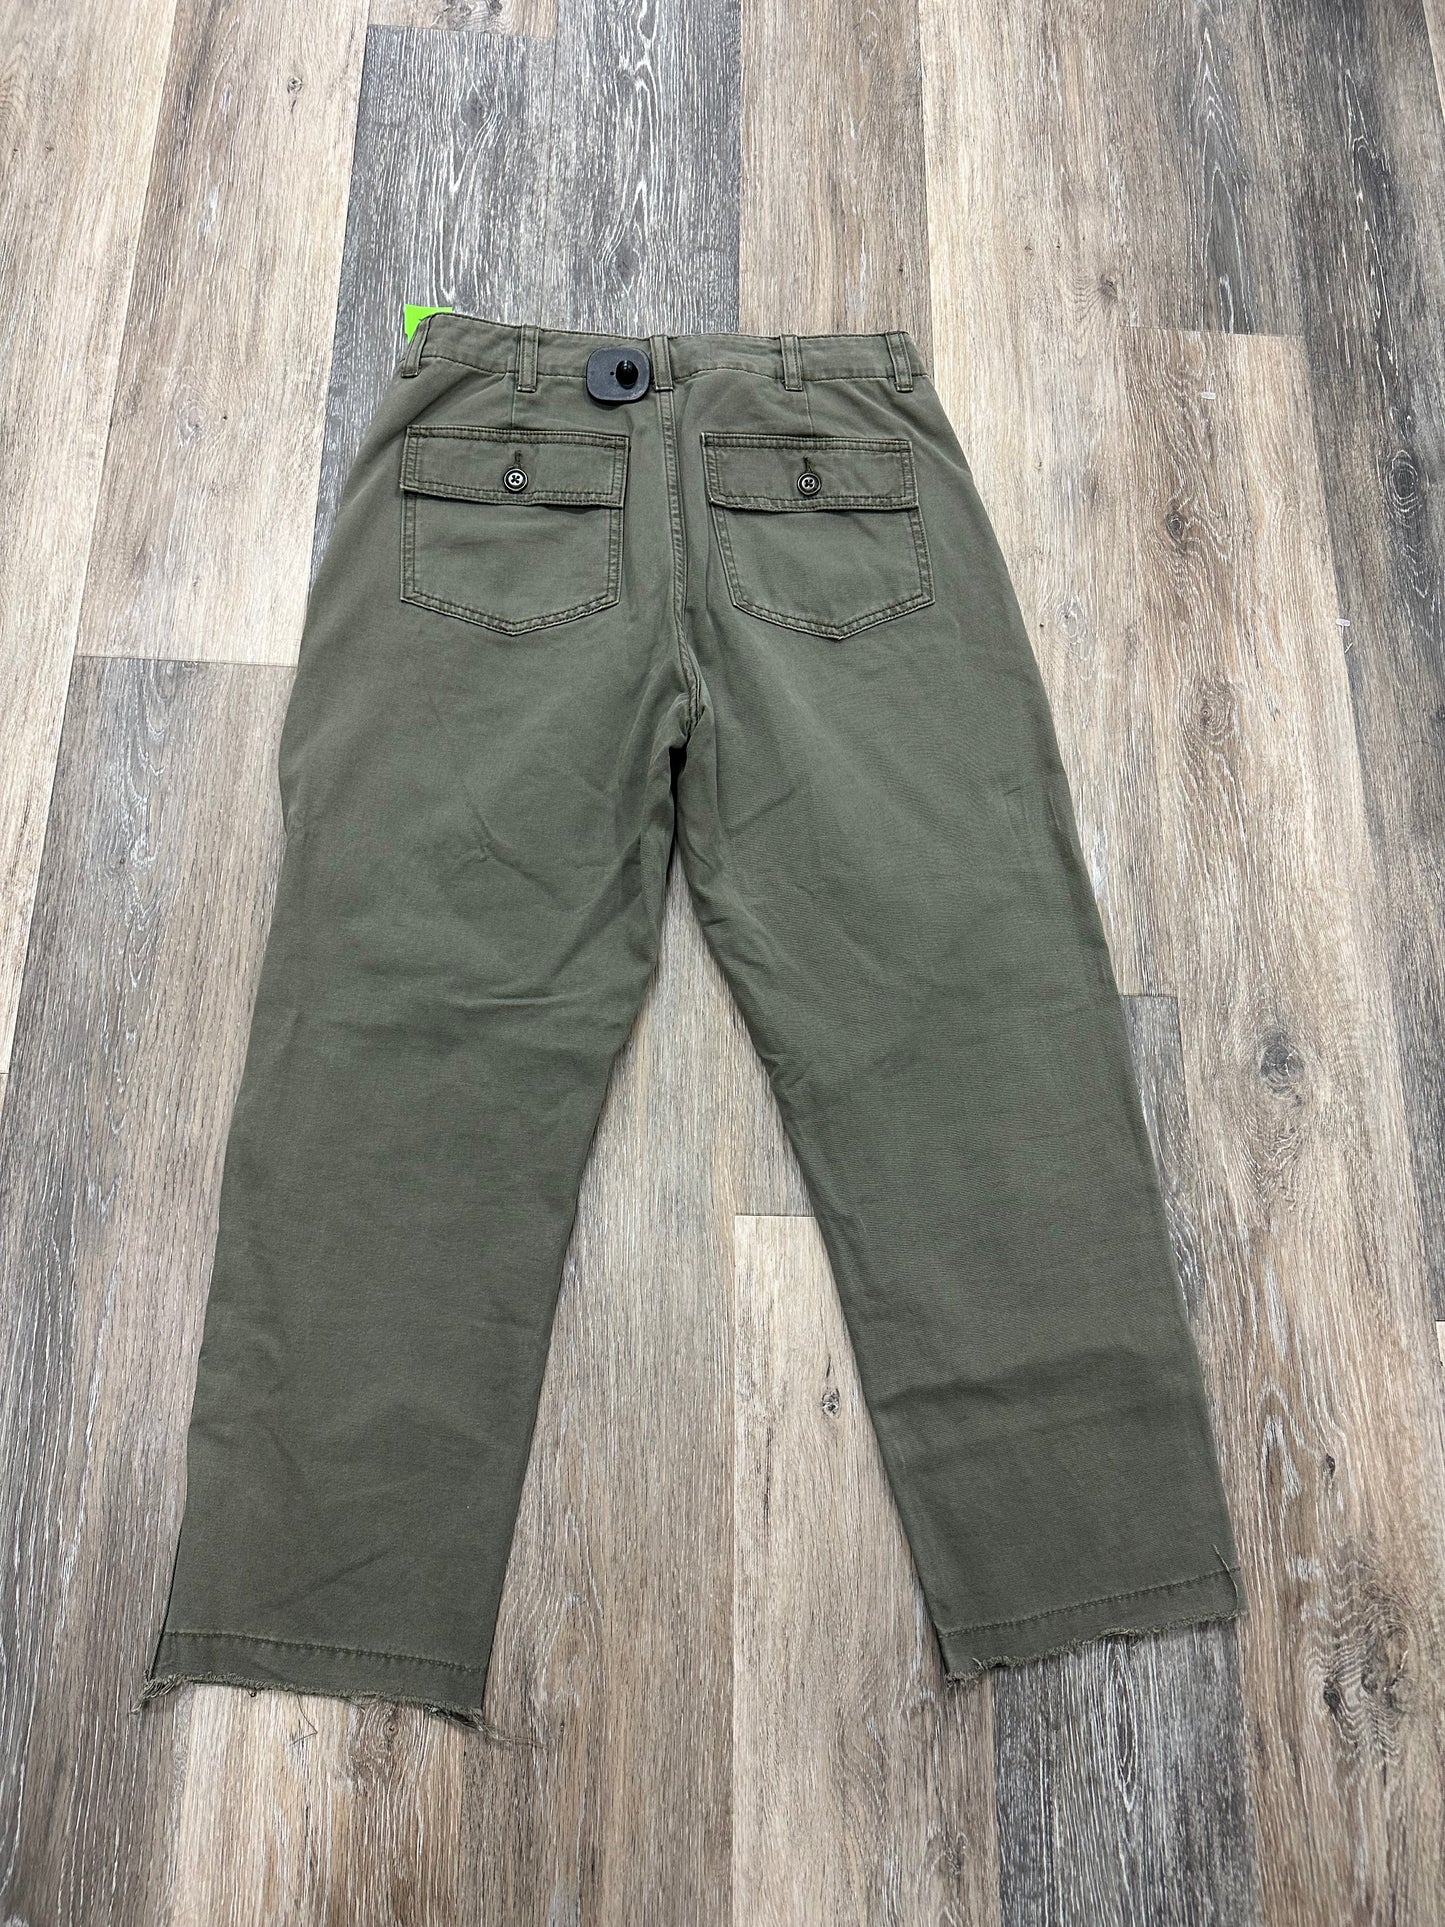 Pants Cargo & Utility By Joes Jeans  Size: 8